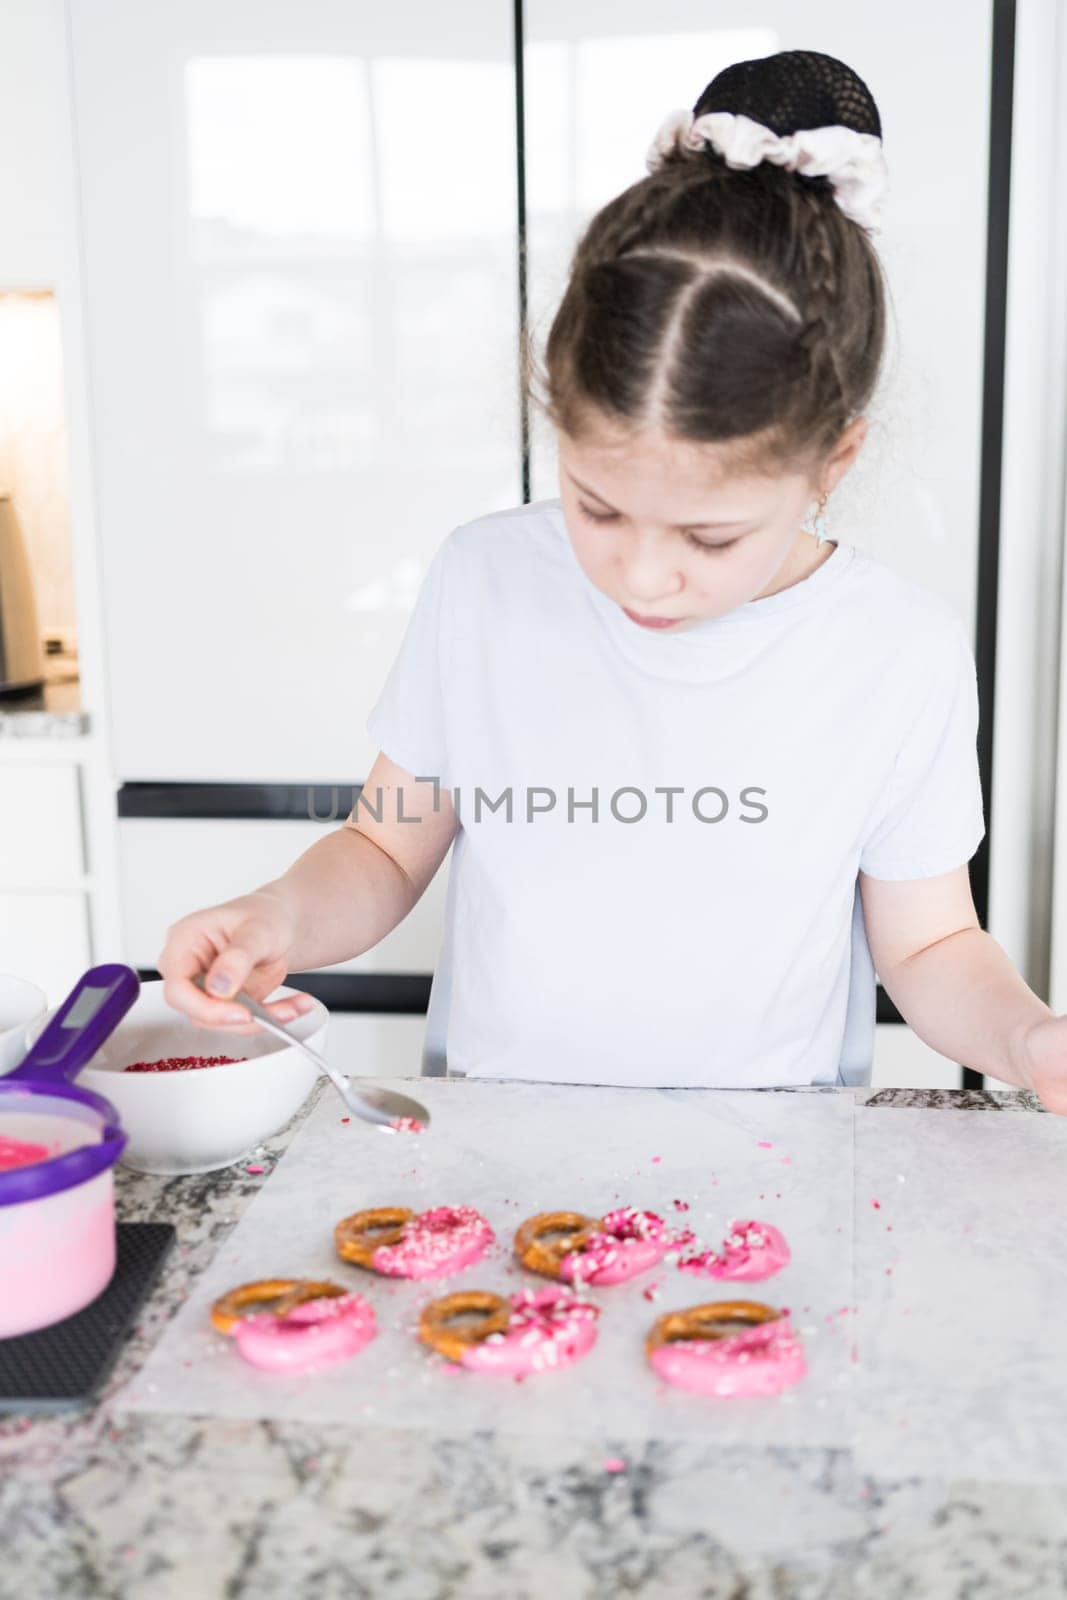 Young Chef Prepares Chocolate-Covered Treats in Sunny Kitchen by arinahabich